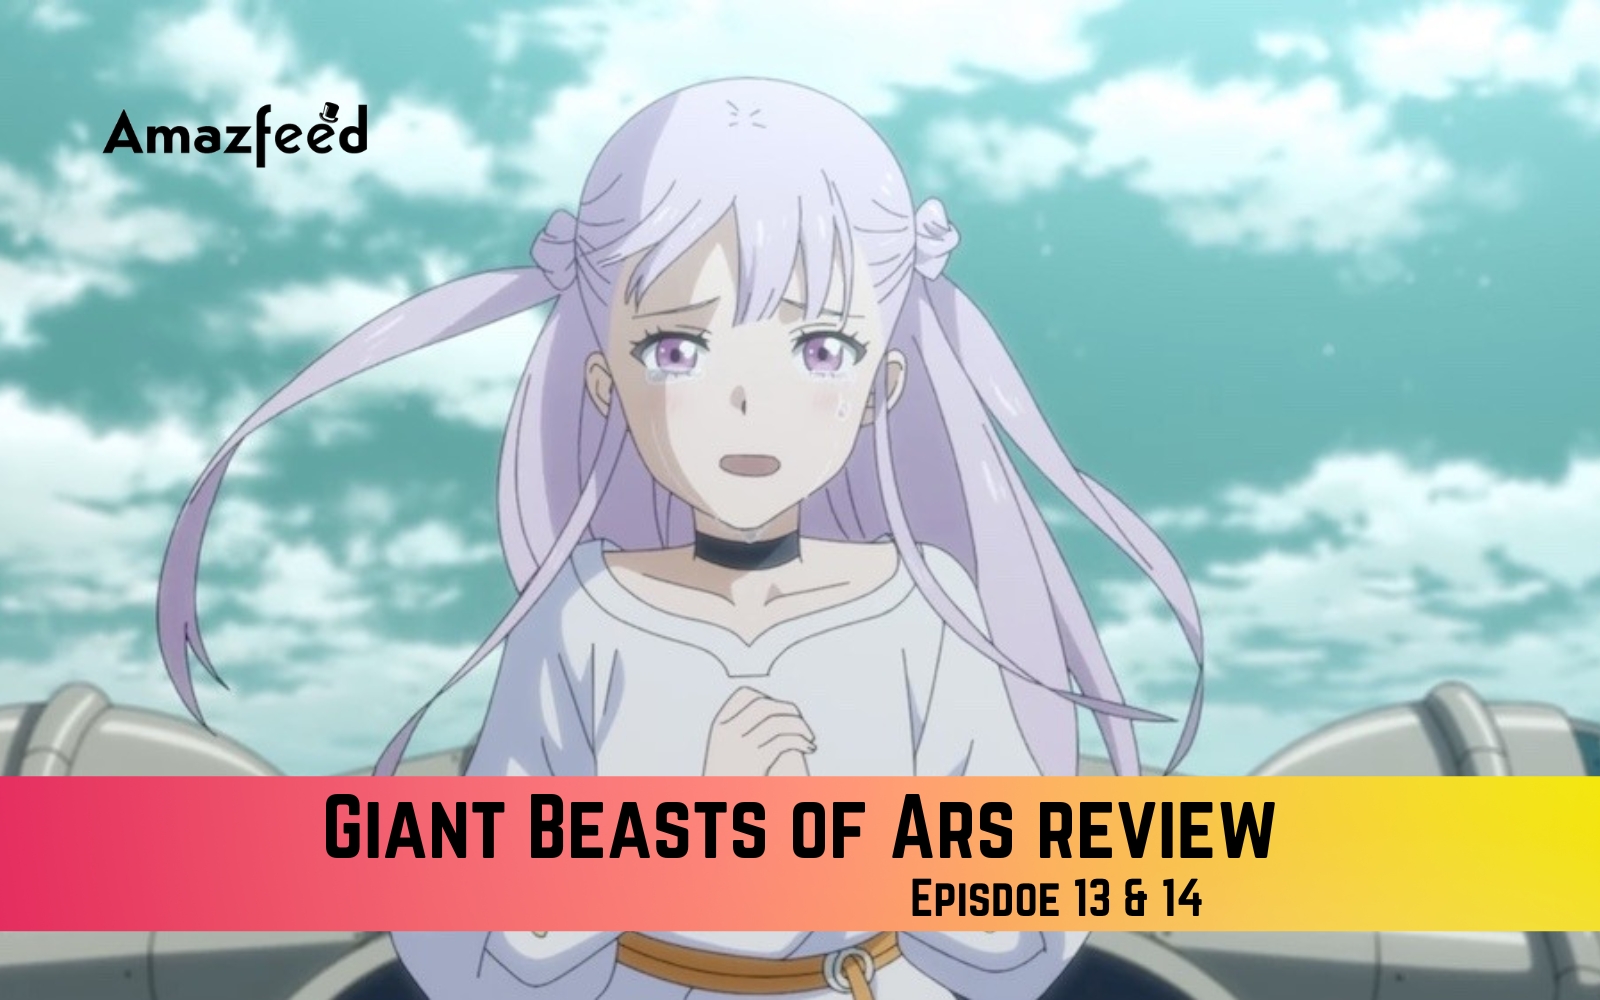 Giant Beasts of Ars Original TV Anime Announced for January 2023